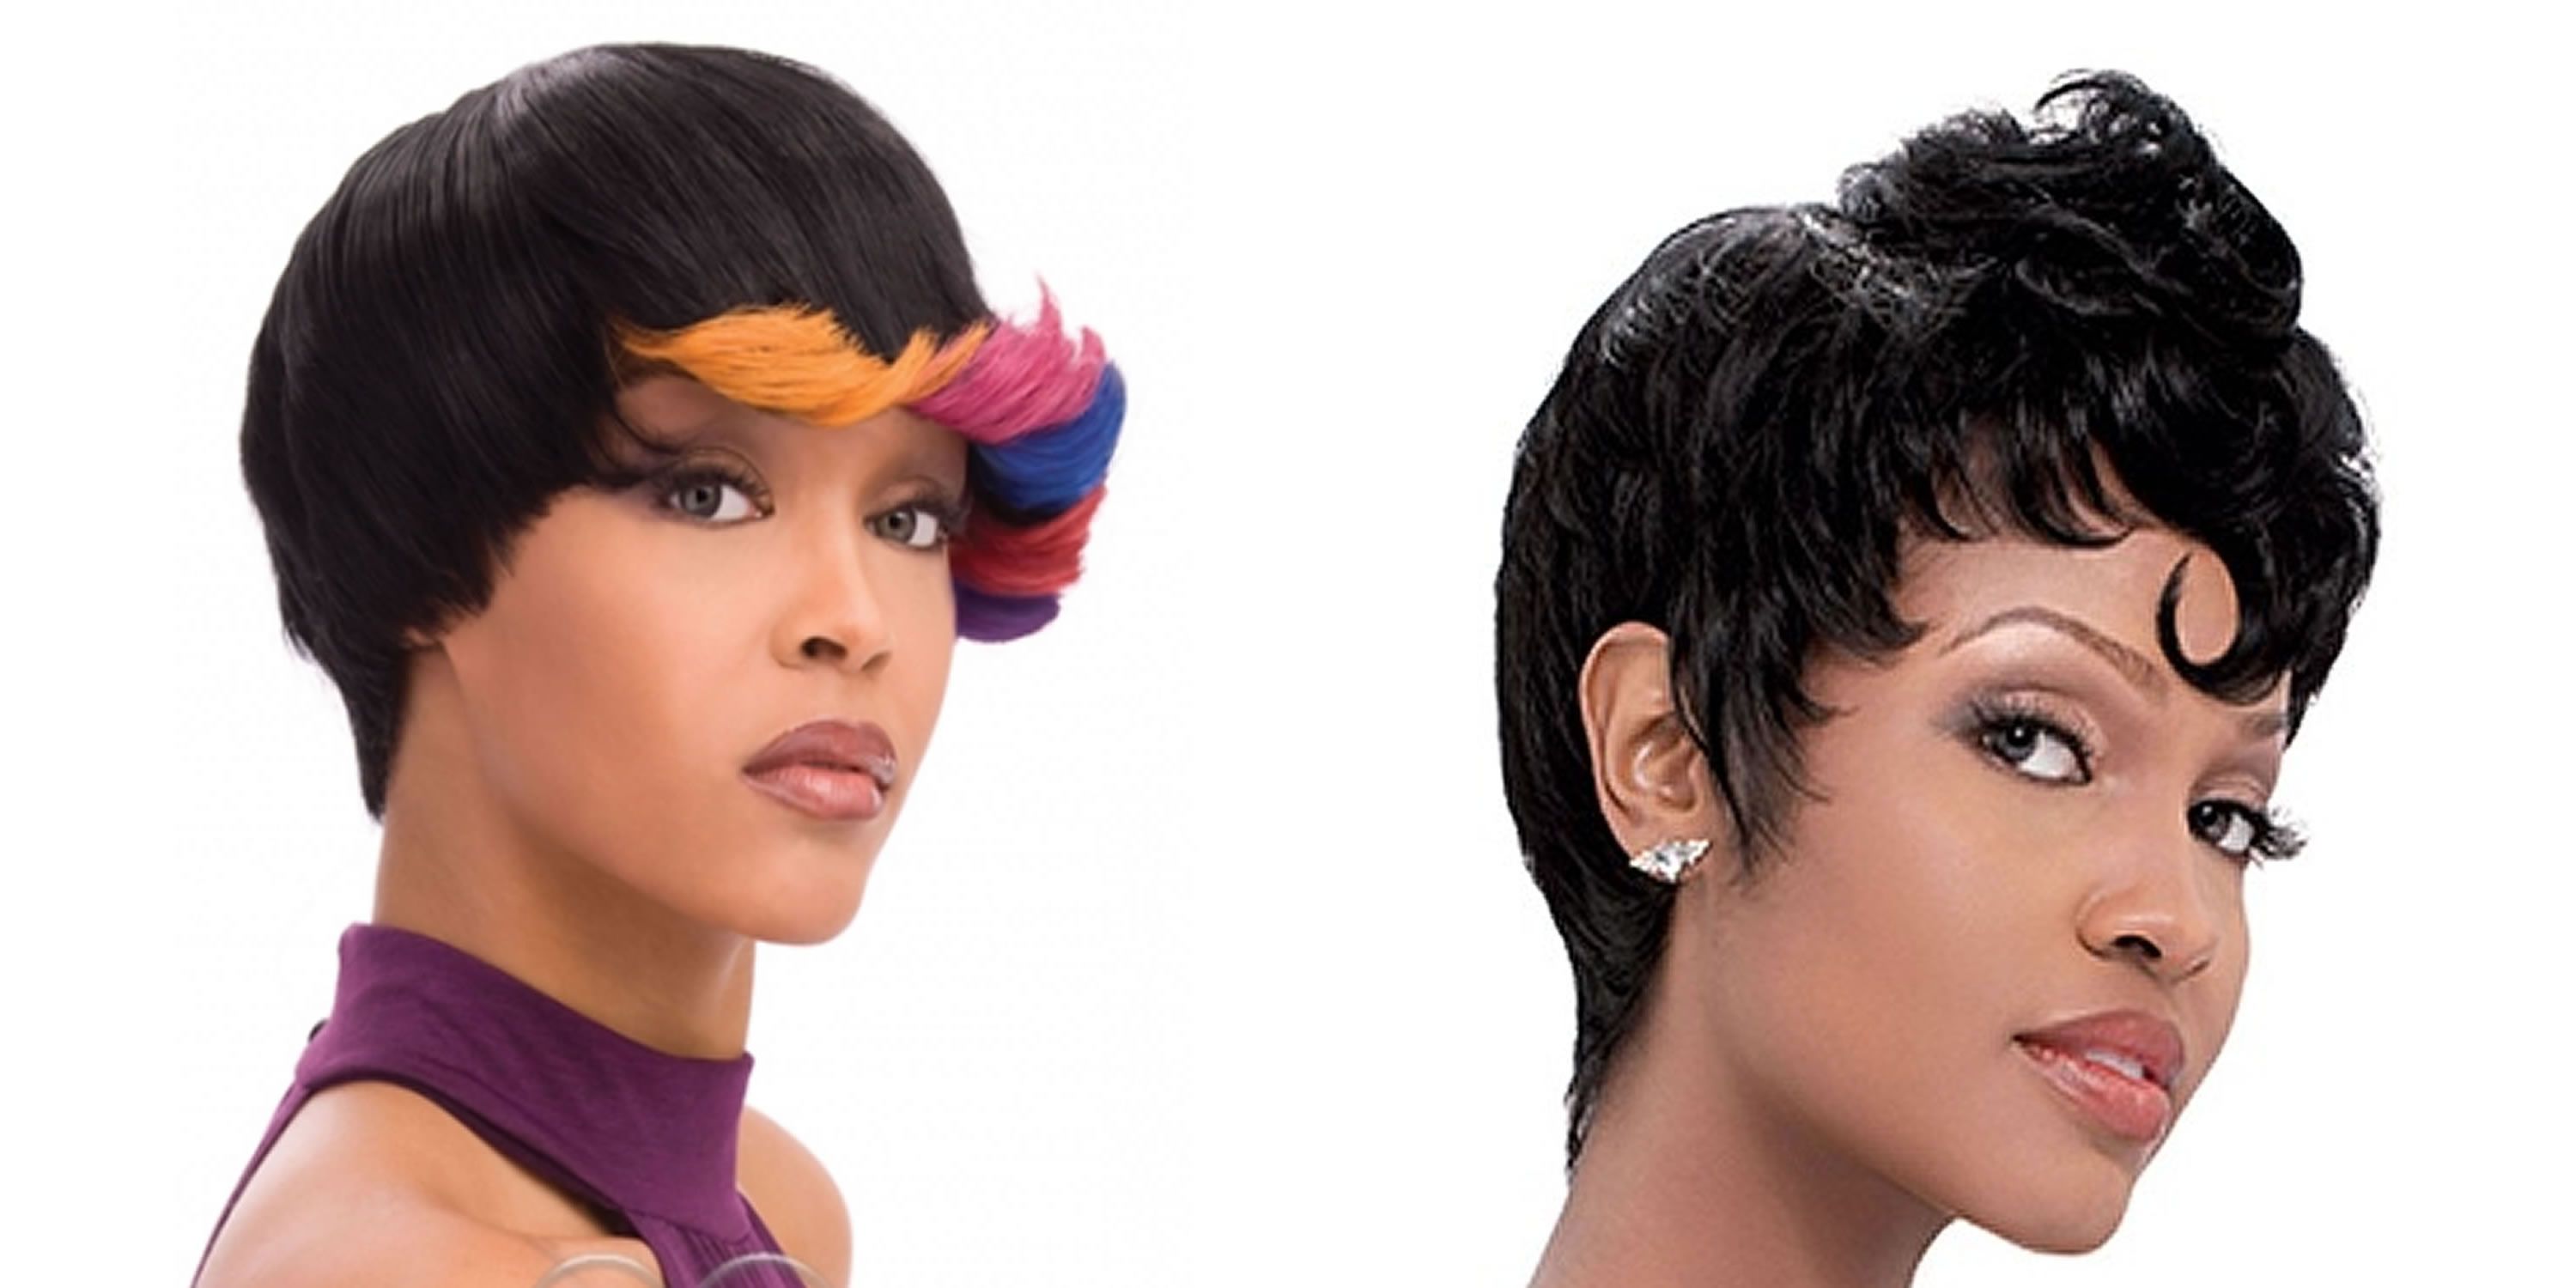 Pixie Hairstyles For Black Women – 60 Cool Short Haircuts For 2017 Pertaining To Short Haircuts For Black Women (View 11 of 25)